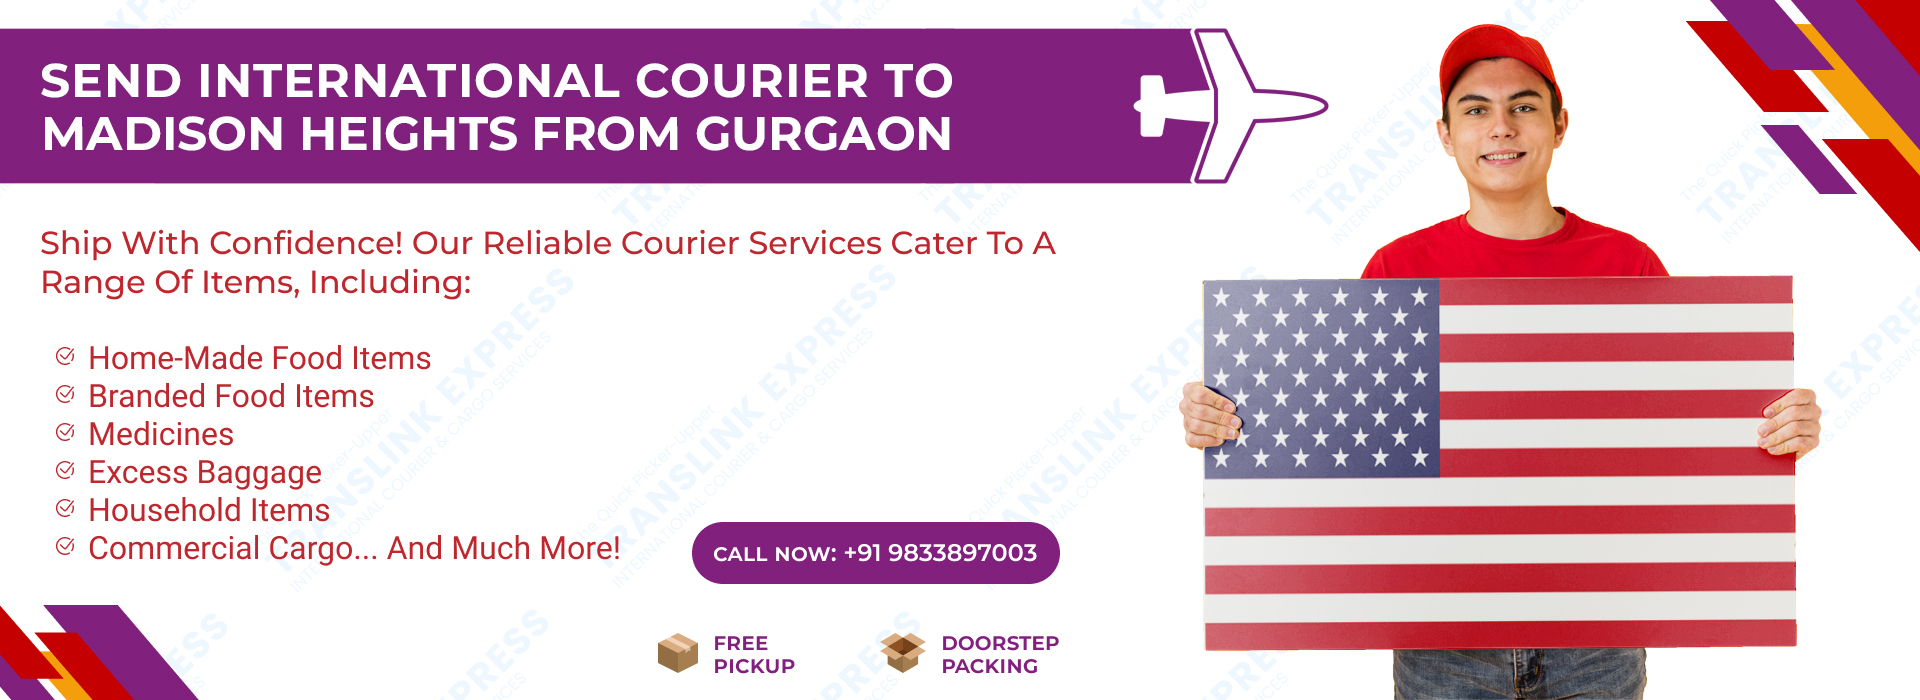 Courier to Madison Heights From Gurgaon